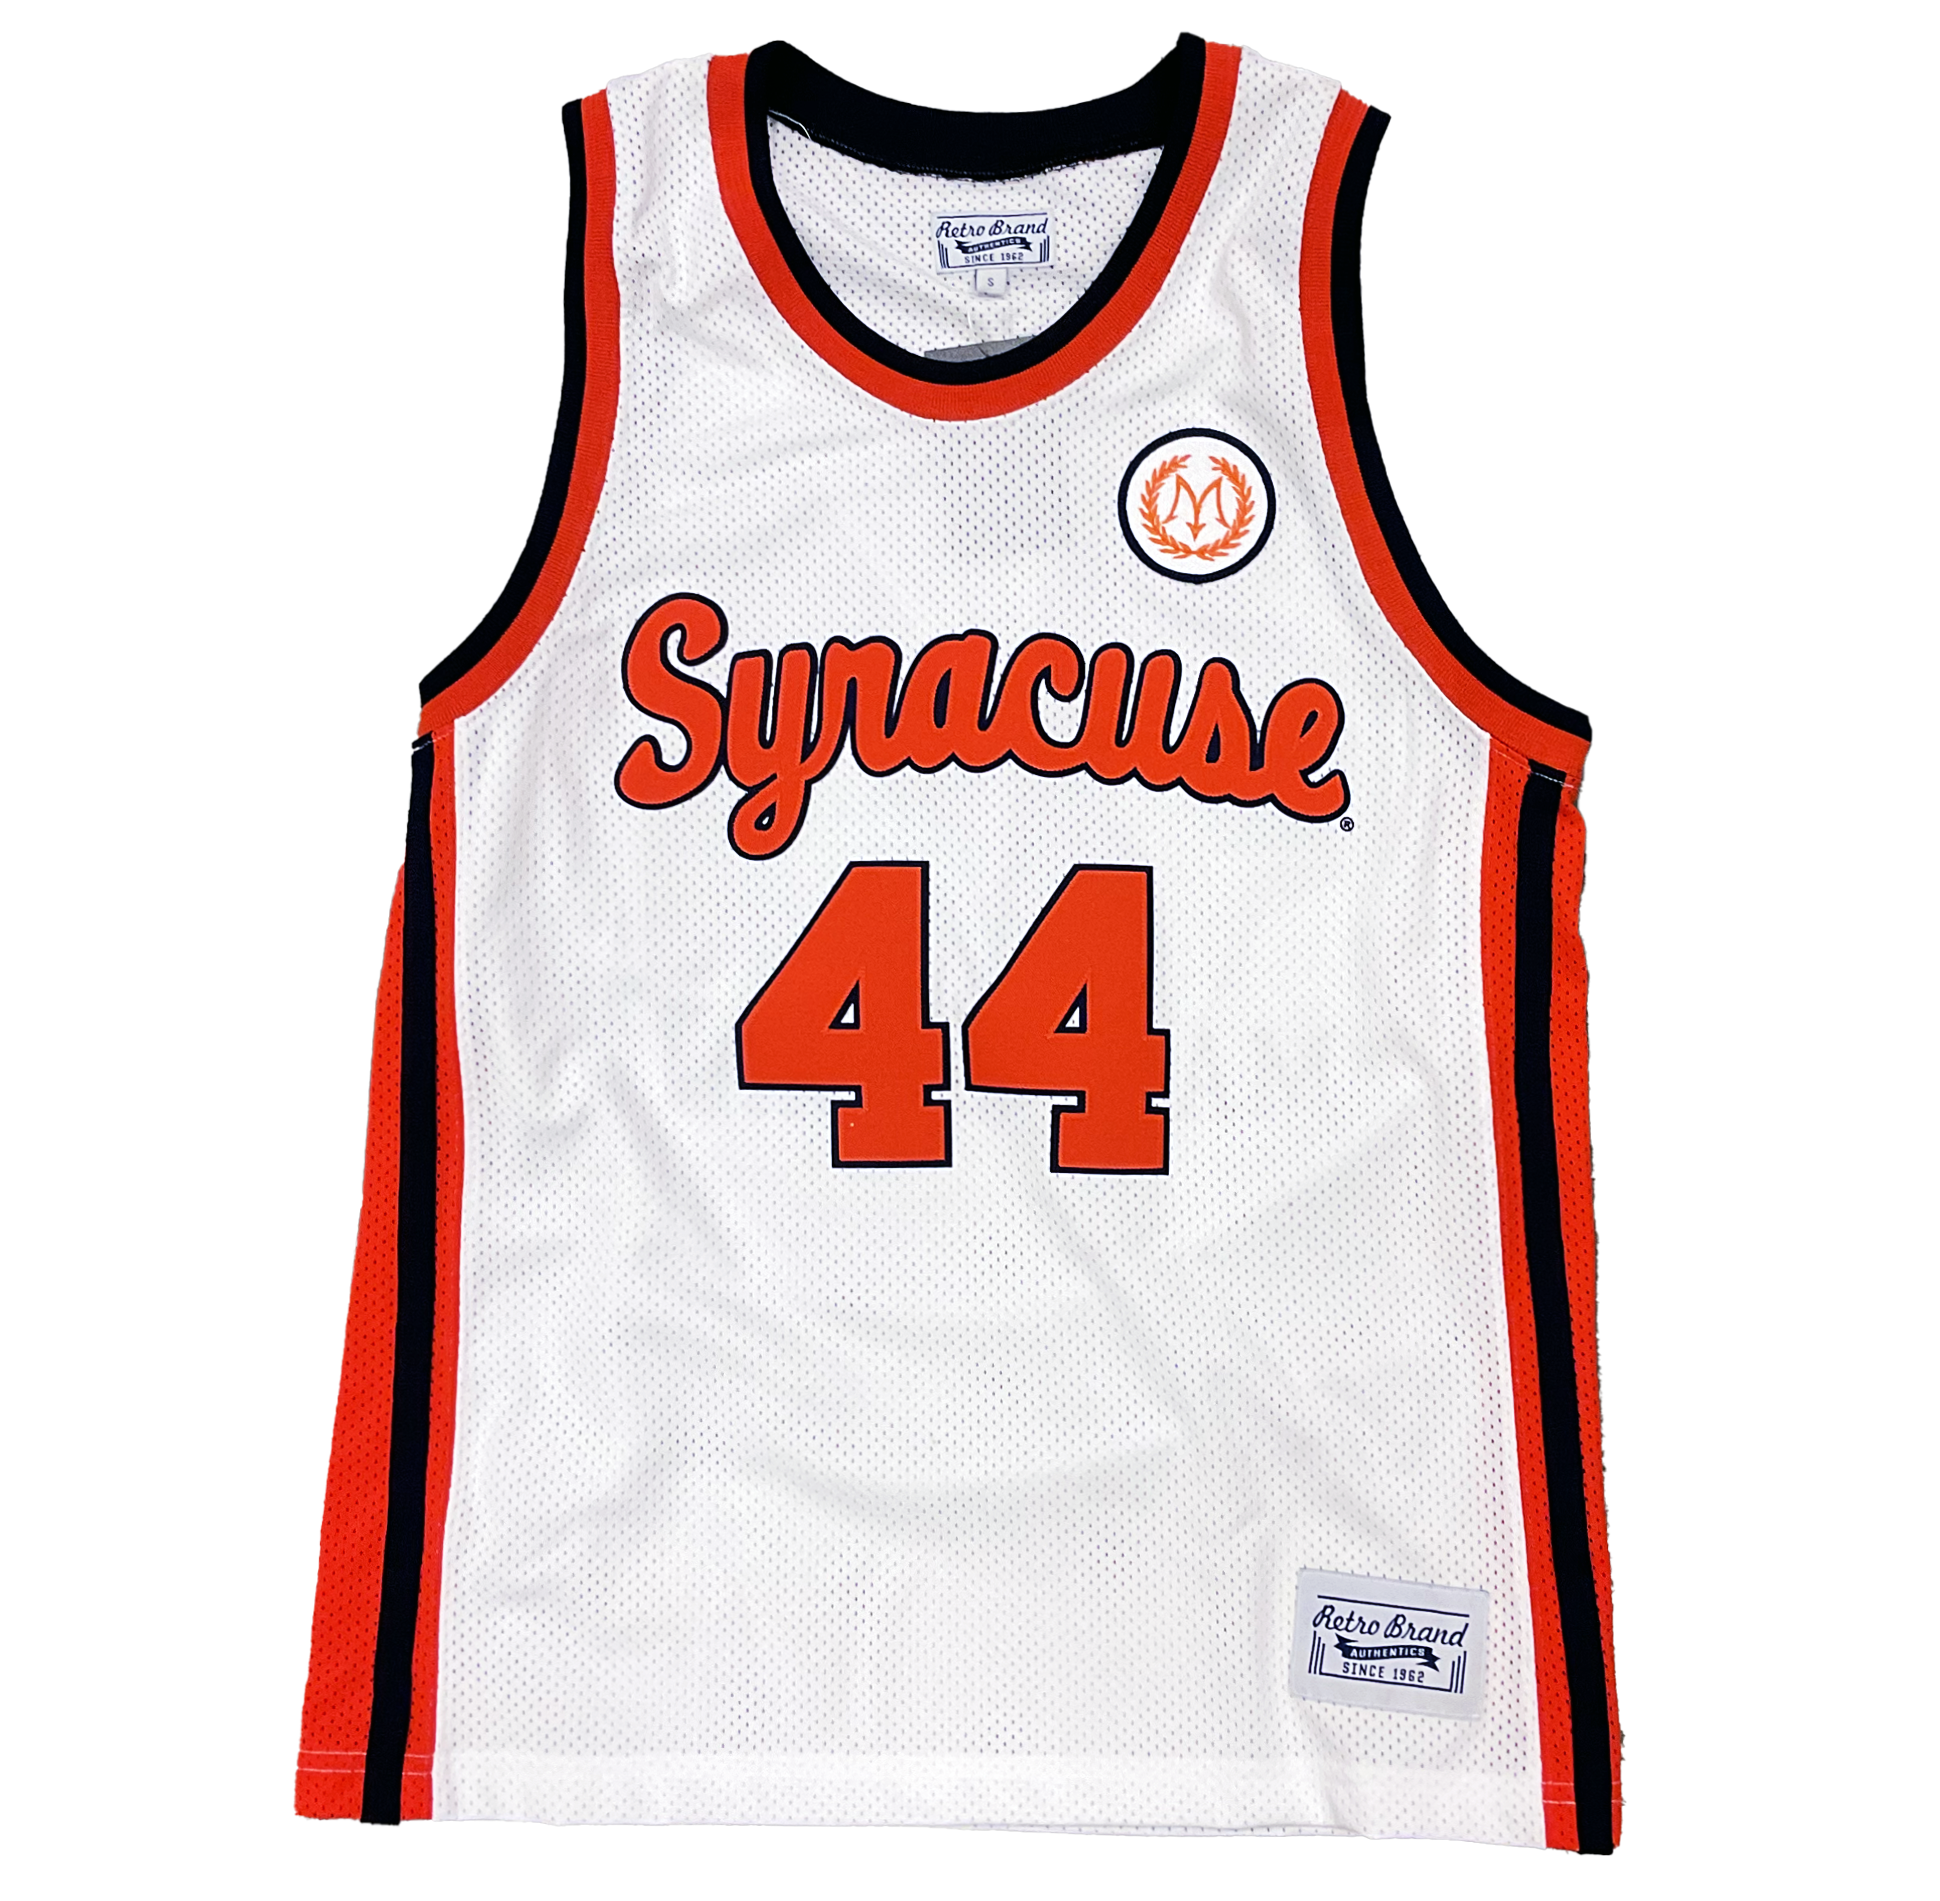 Syracuse collection